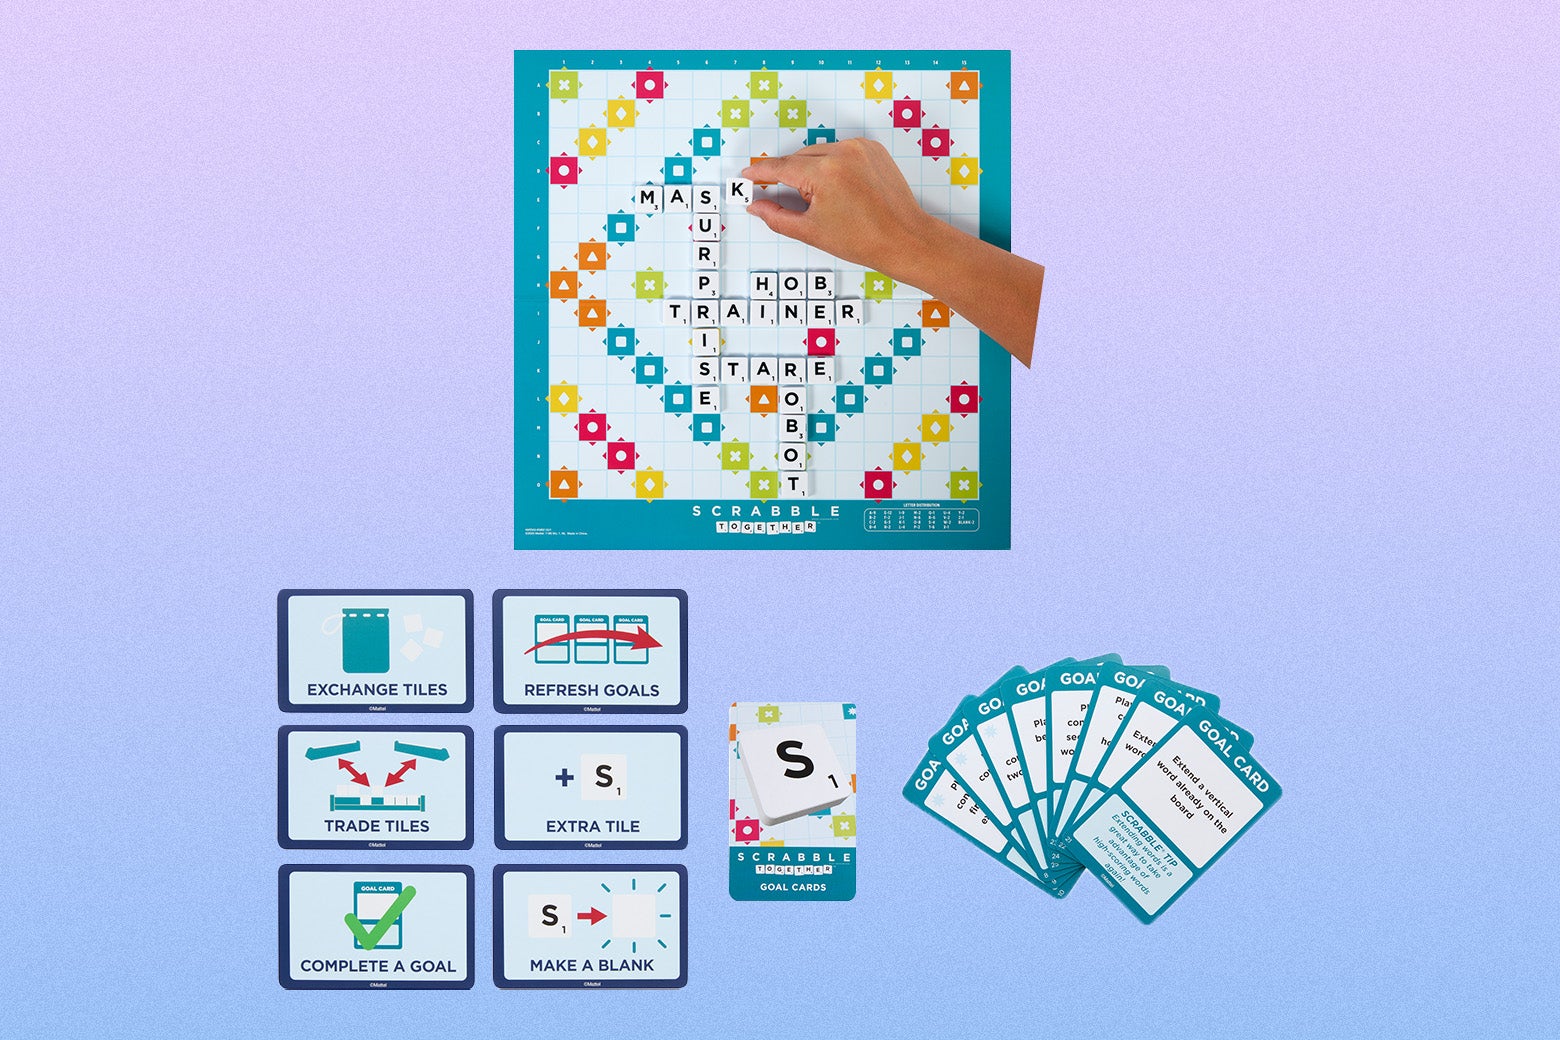 An illustration shows the new, more friendly-looking board, plus some of the "goal cards" and "helper cards." The "helper cards" have messages like "exchange tiles" and "make a blank" and "refresh goals."